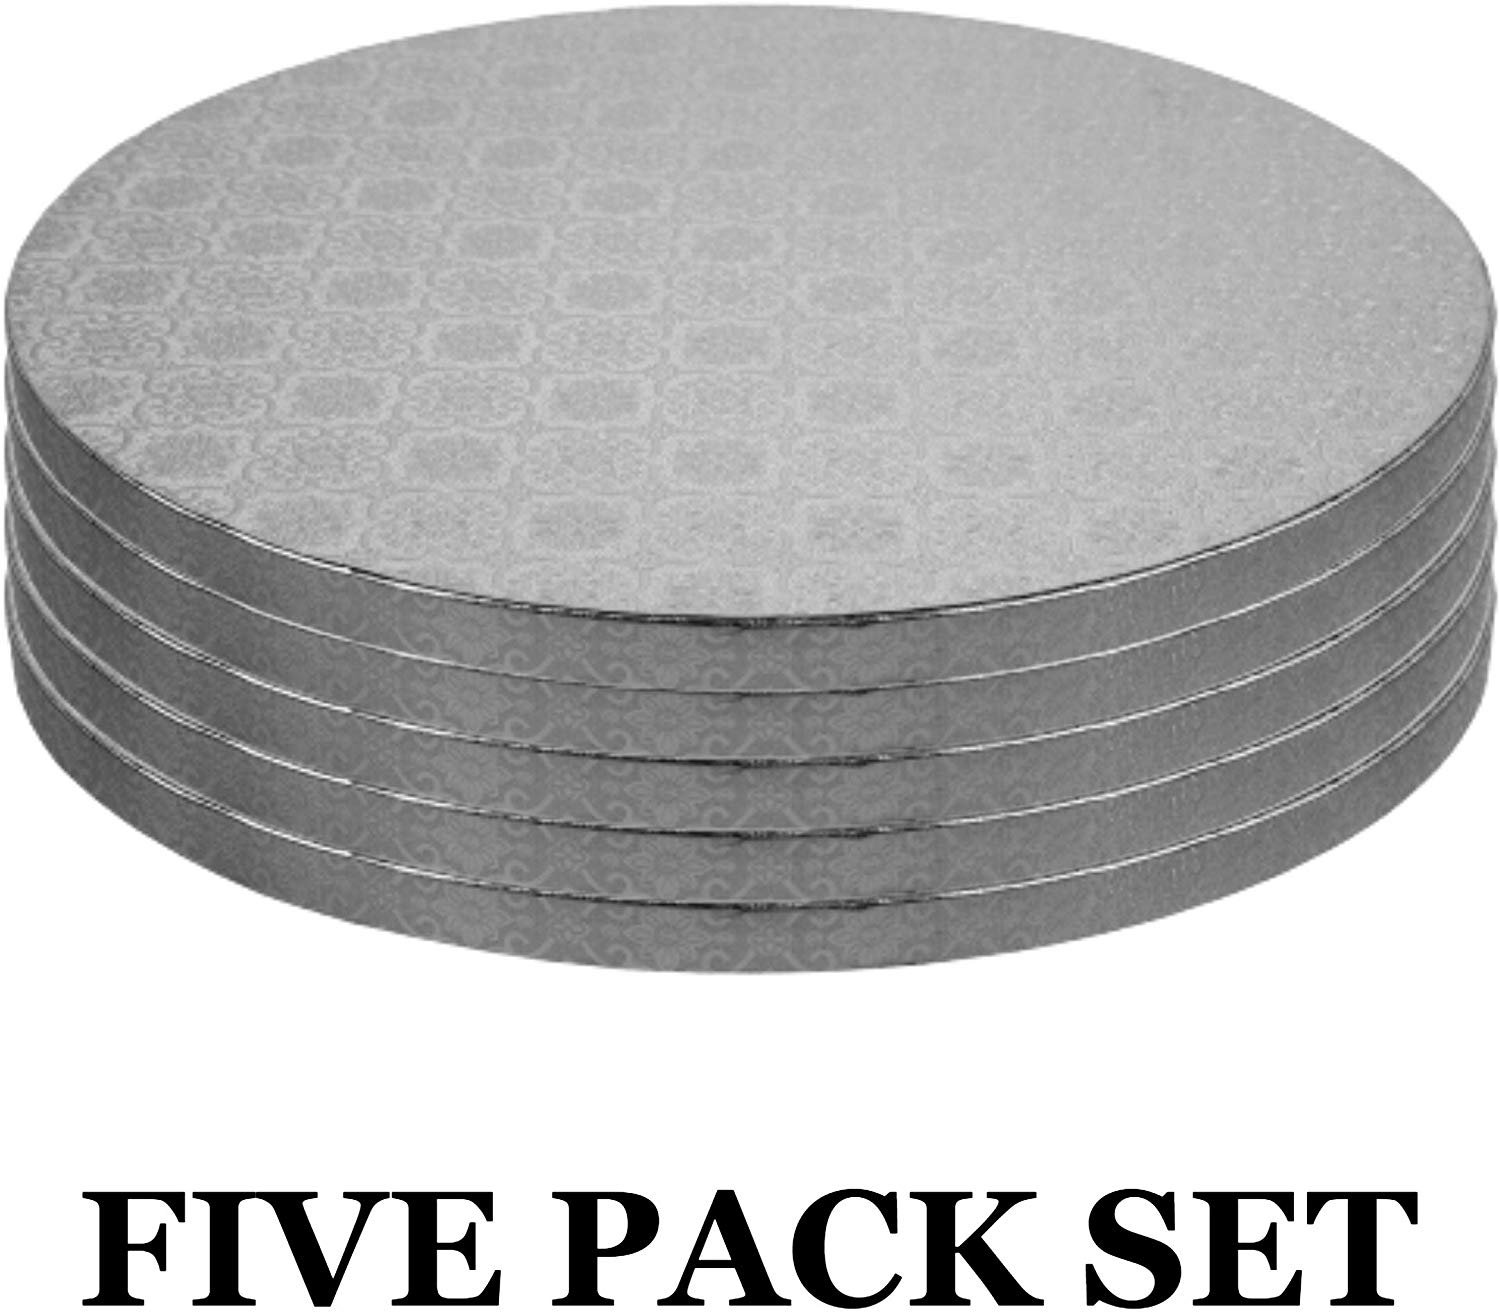 OCreme Cake Board, Silver Foil Round Cake Circles with Gorgeous Design, Sturdy & Durable 1/2 Thick Cake Drums, Round Cake Boards with 9 Diameter, Pack of 5 Disposable Cake Drums - image 2 of 6